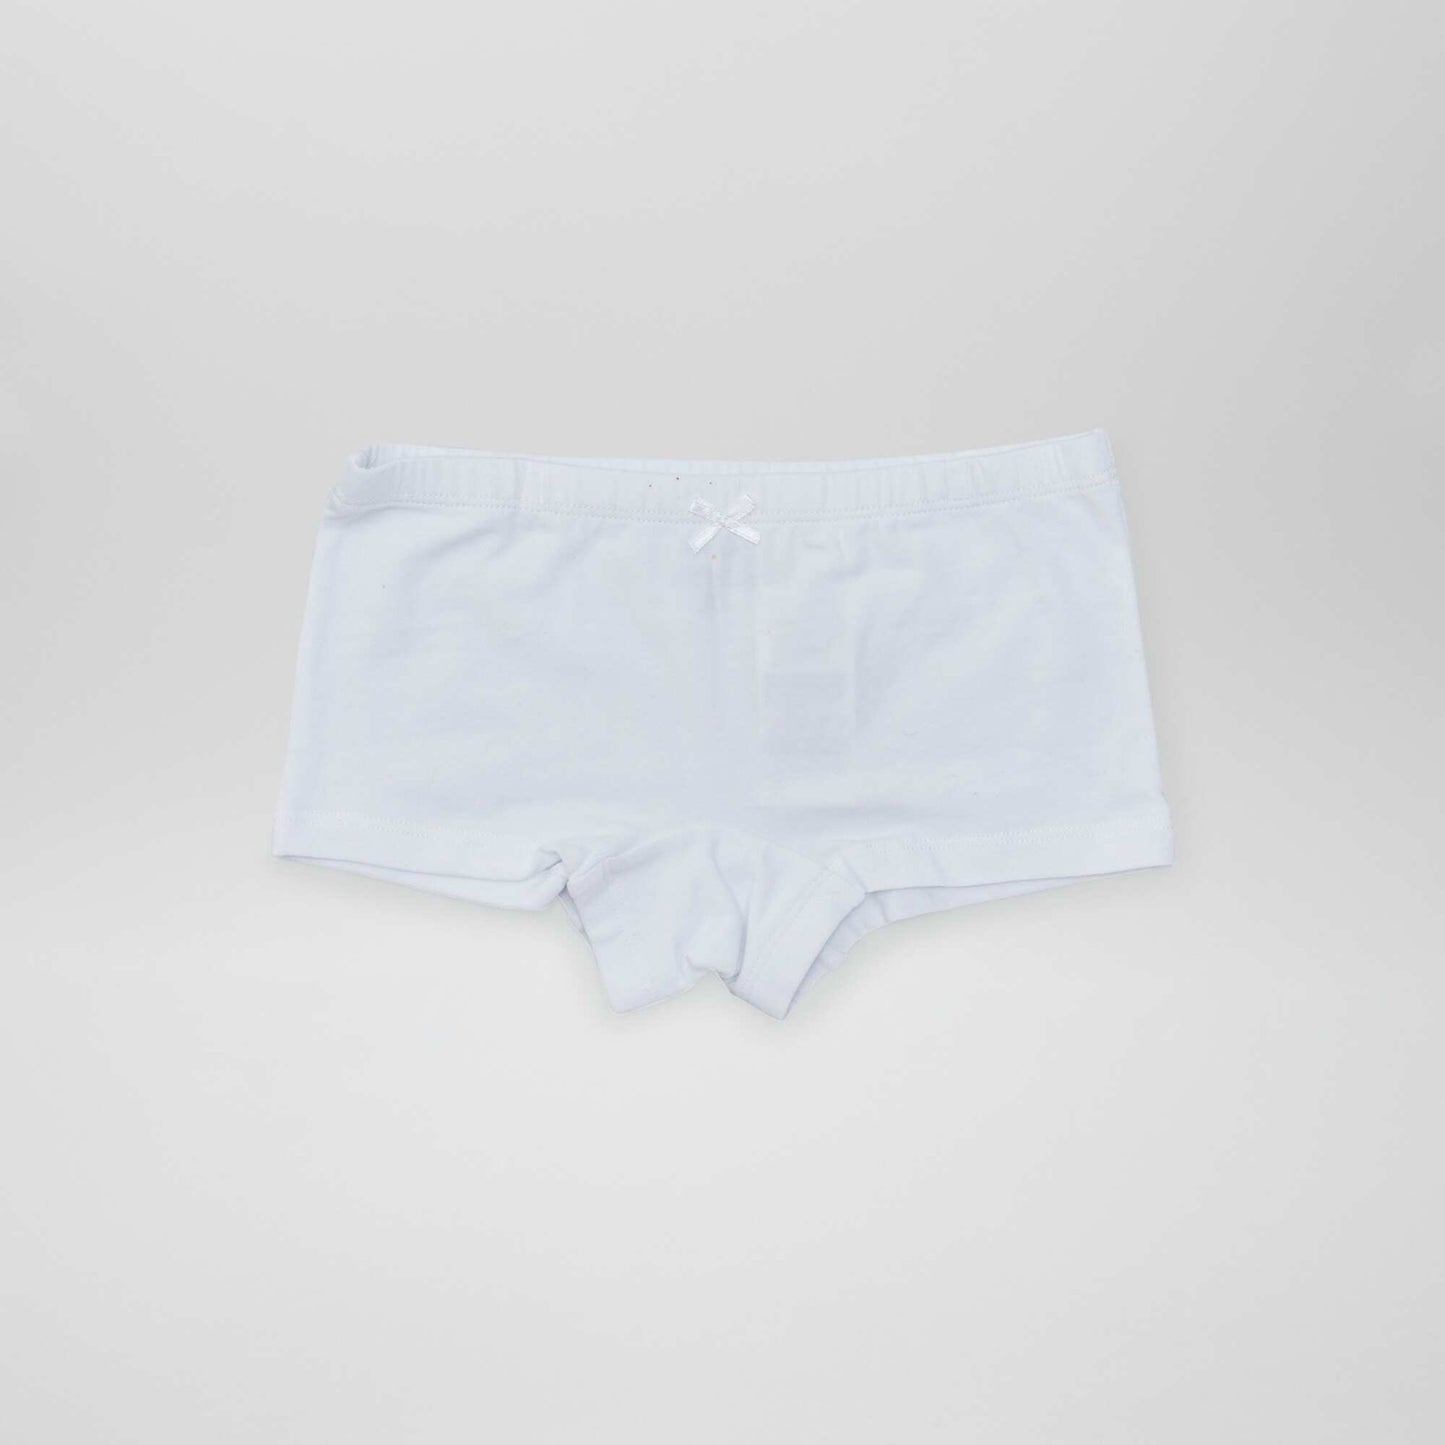 Pack of 3 pairs of boy shorts SPE_WHITE